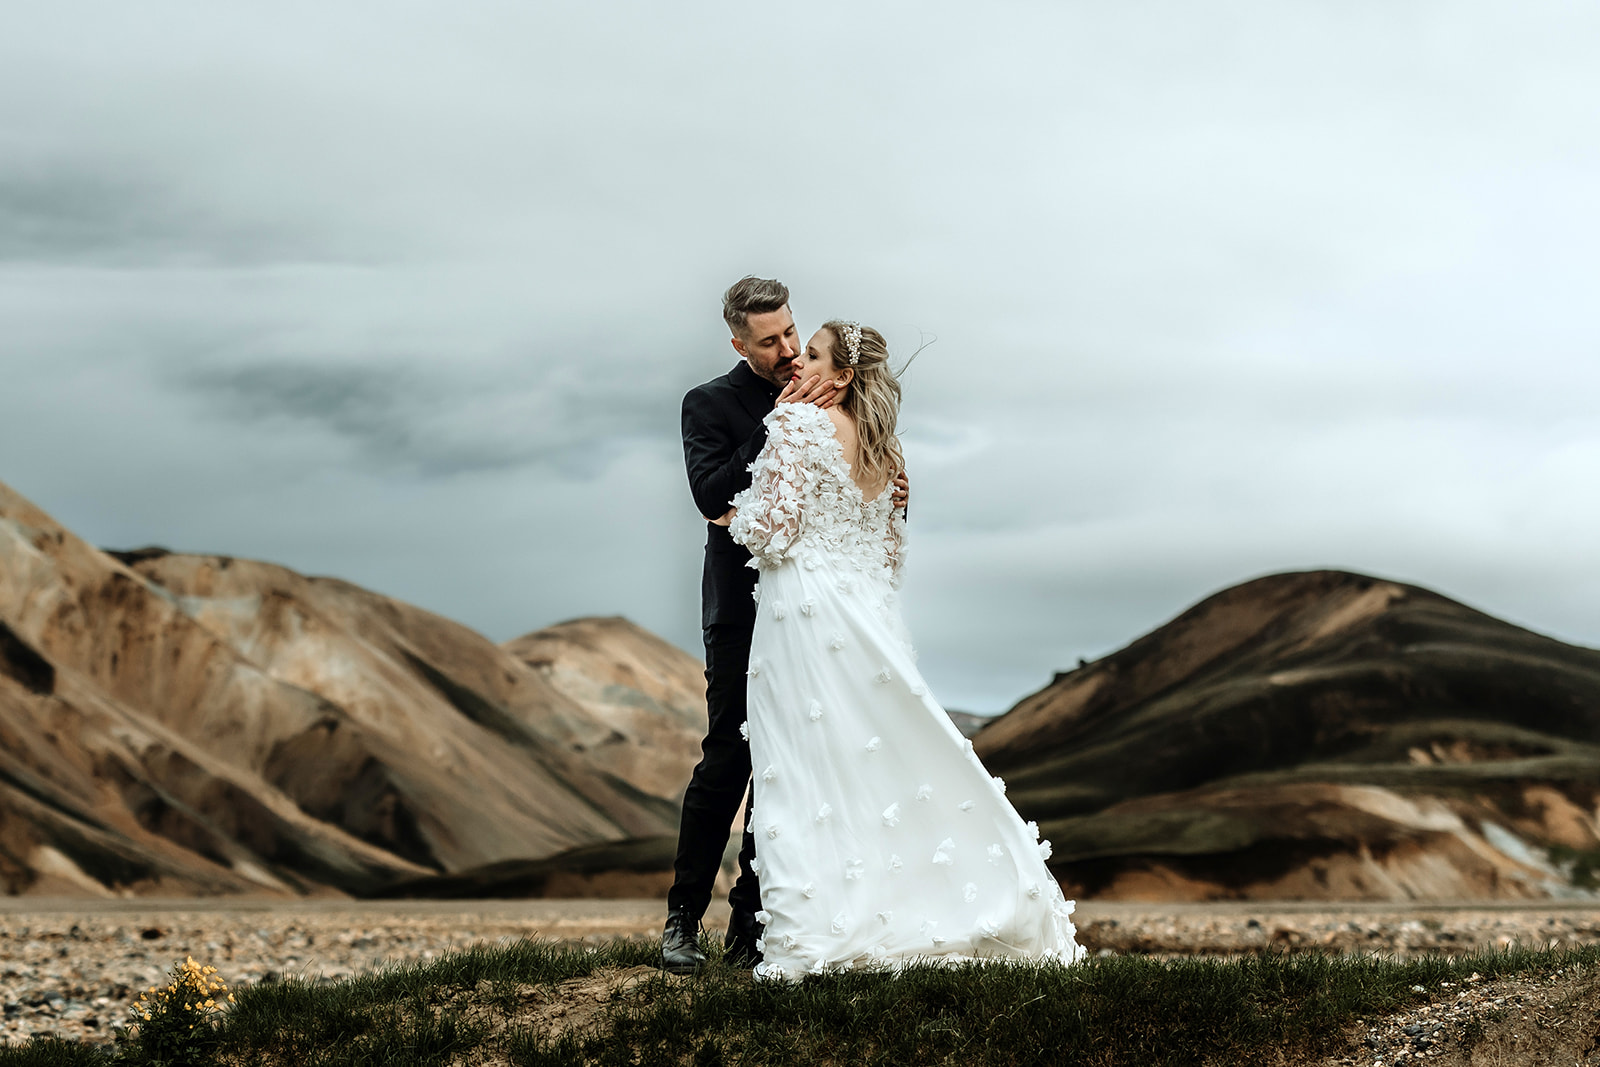 Married couple in wedding attire embracing tightly in the dramatic and moody landscape of the Icelandic highlands,